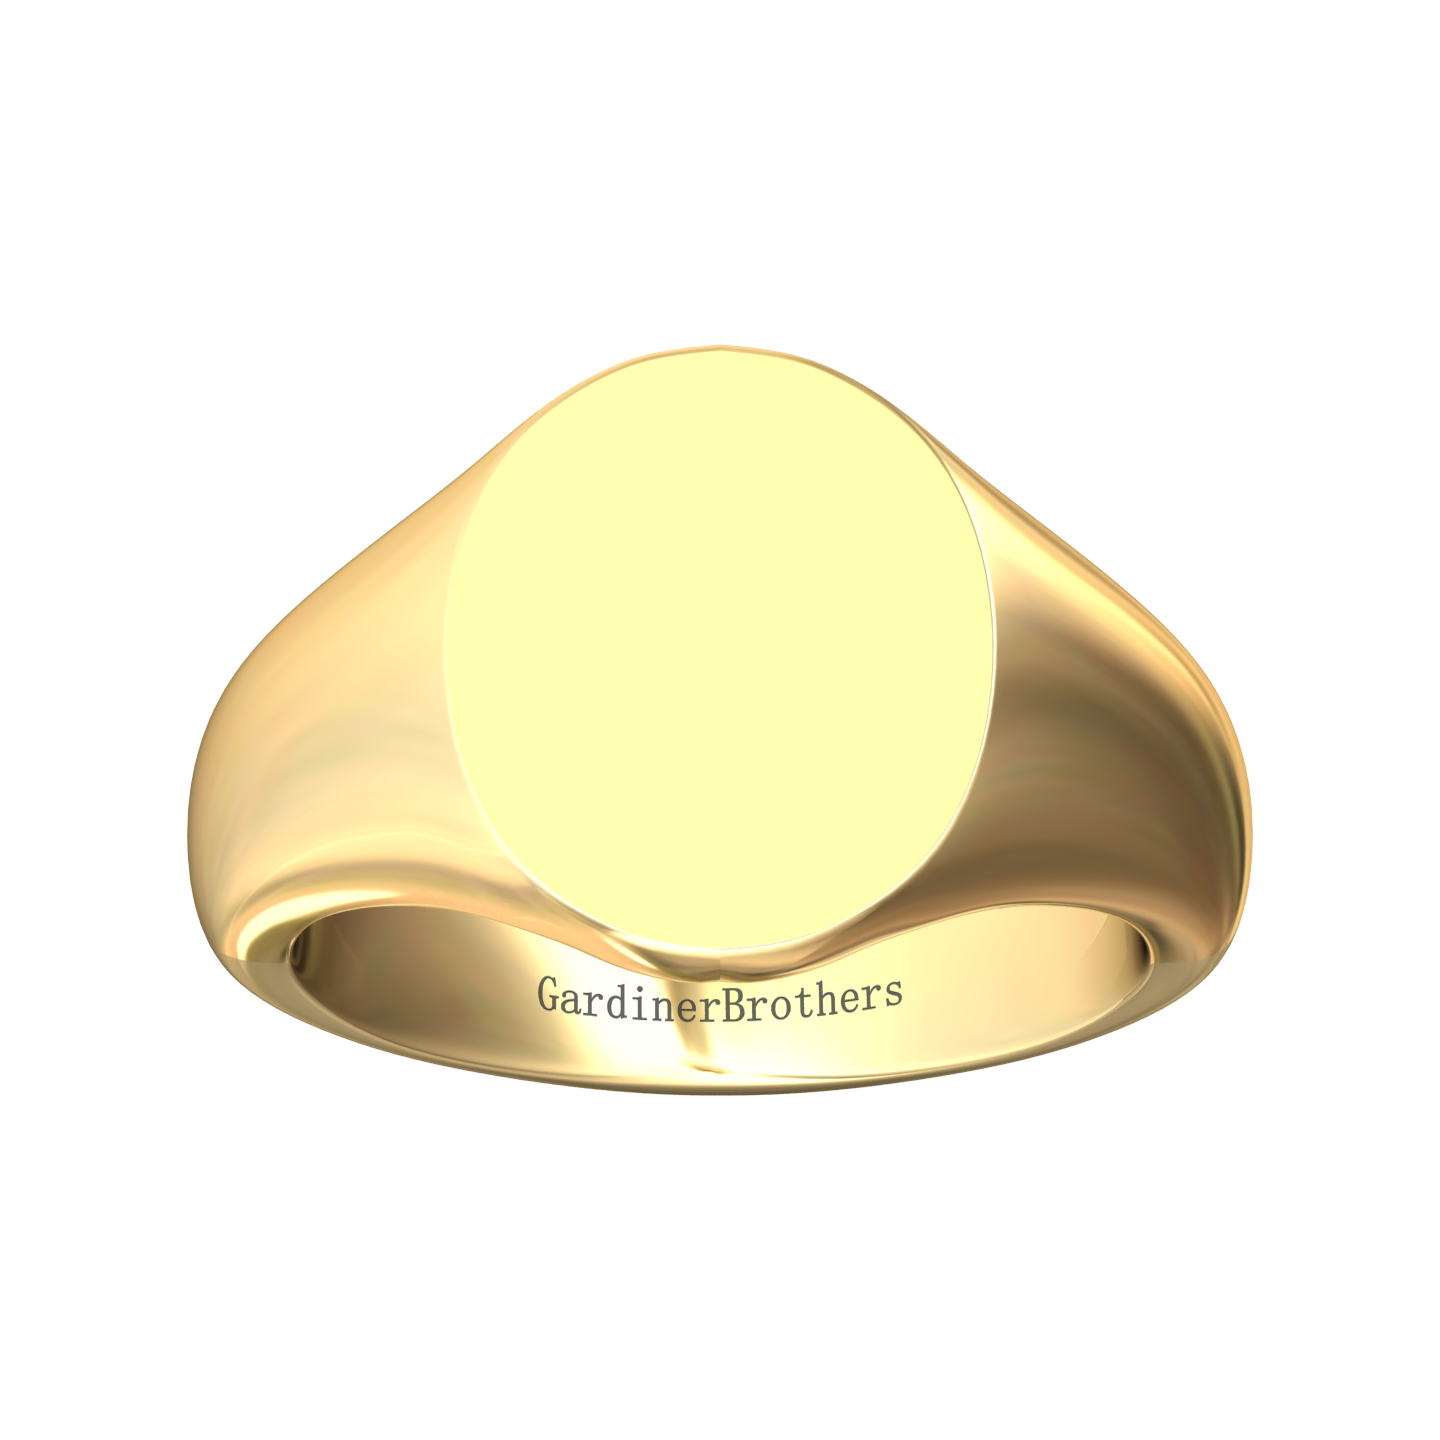 Oval Signet Ring 13x11mm  Gardiner Brothers   